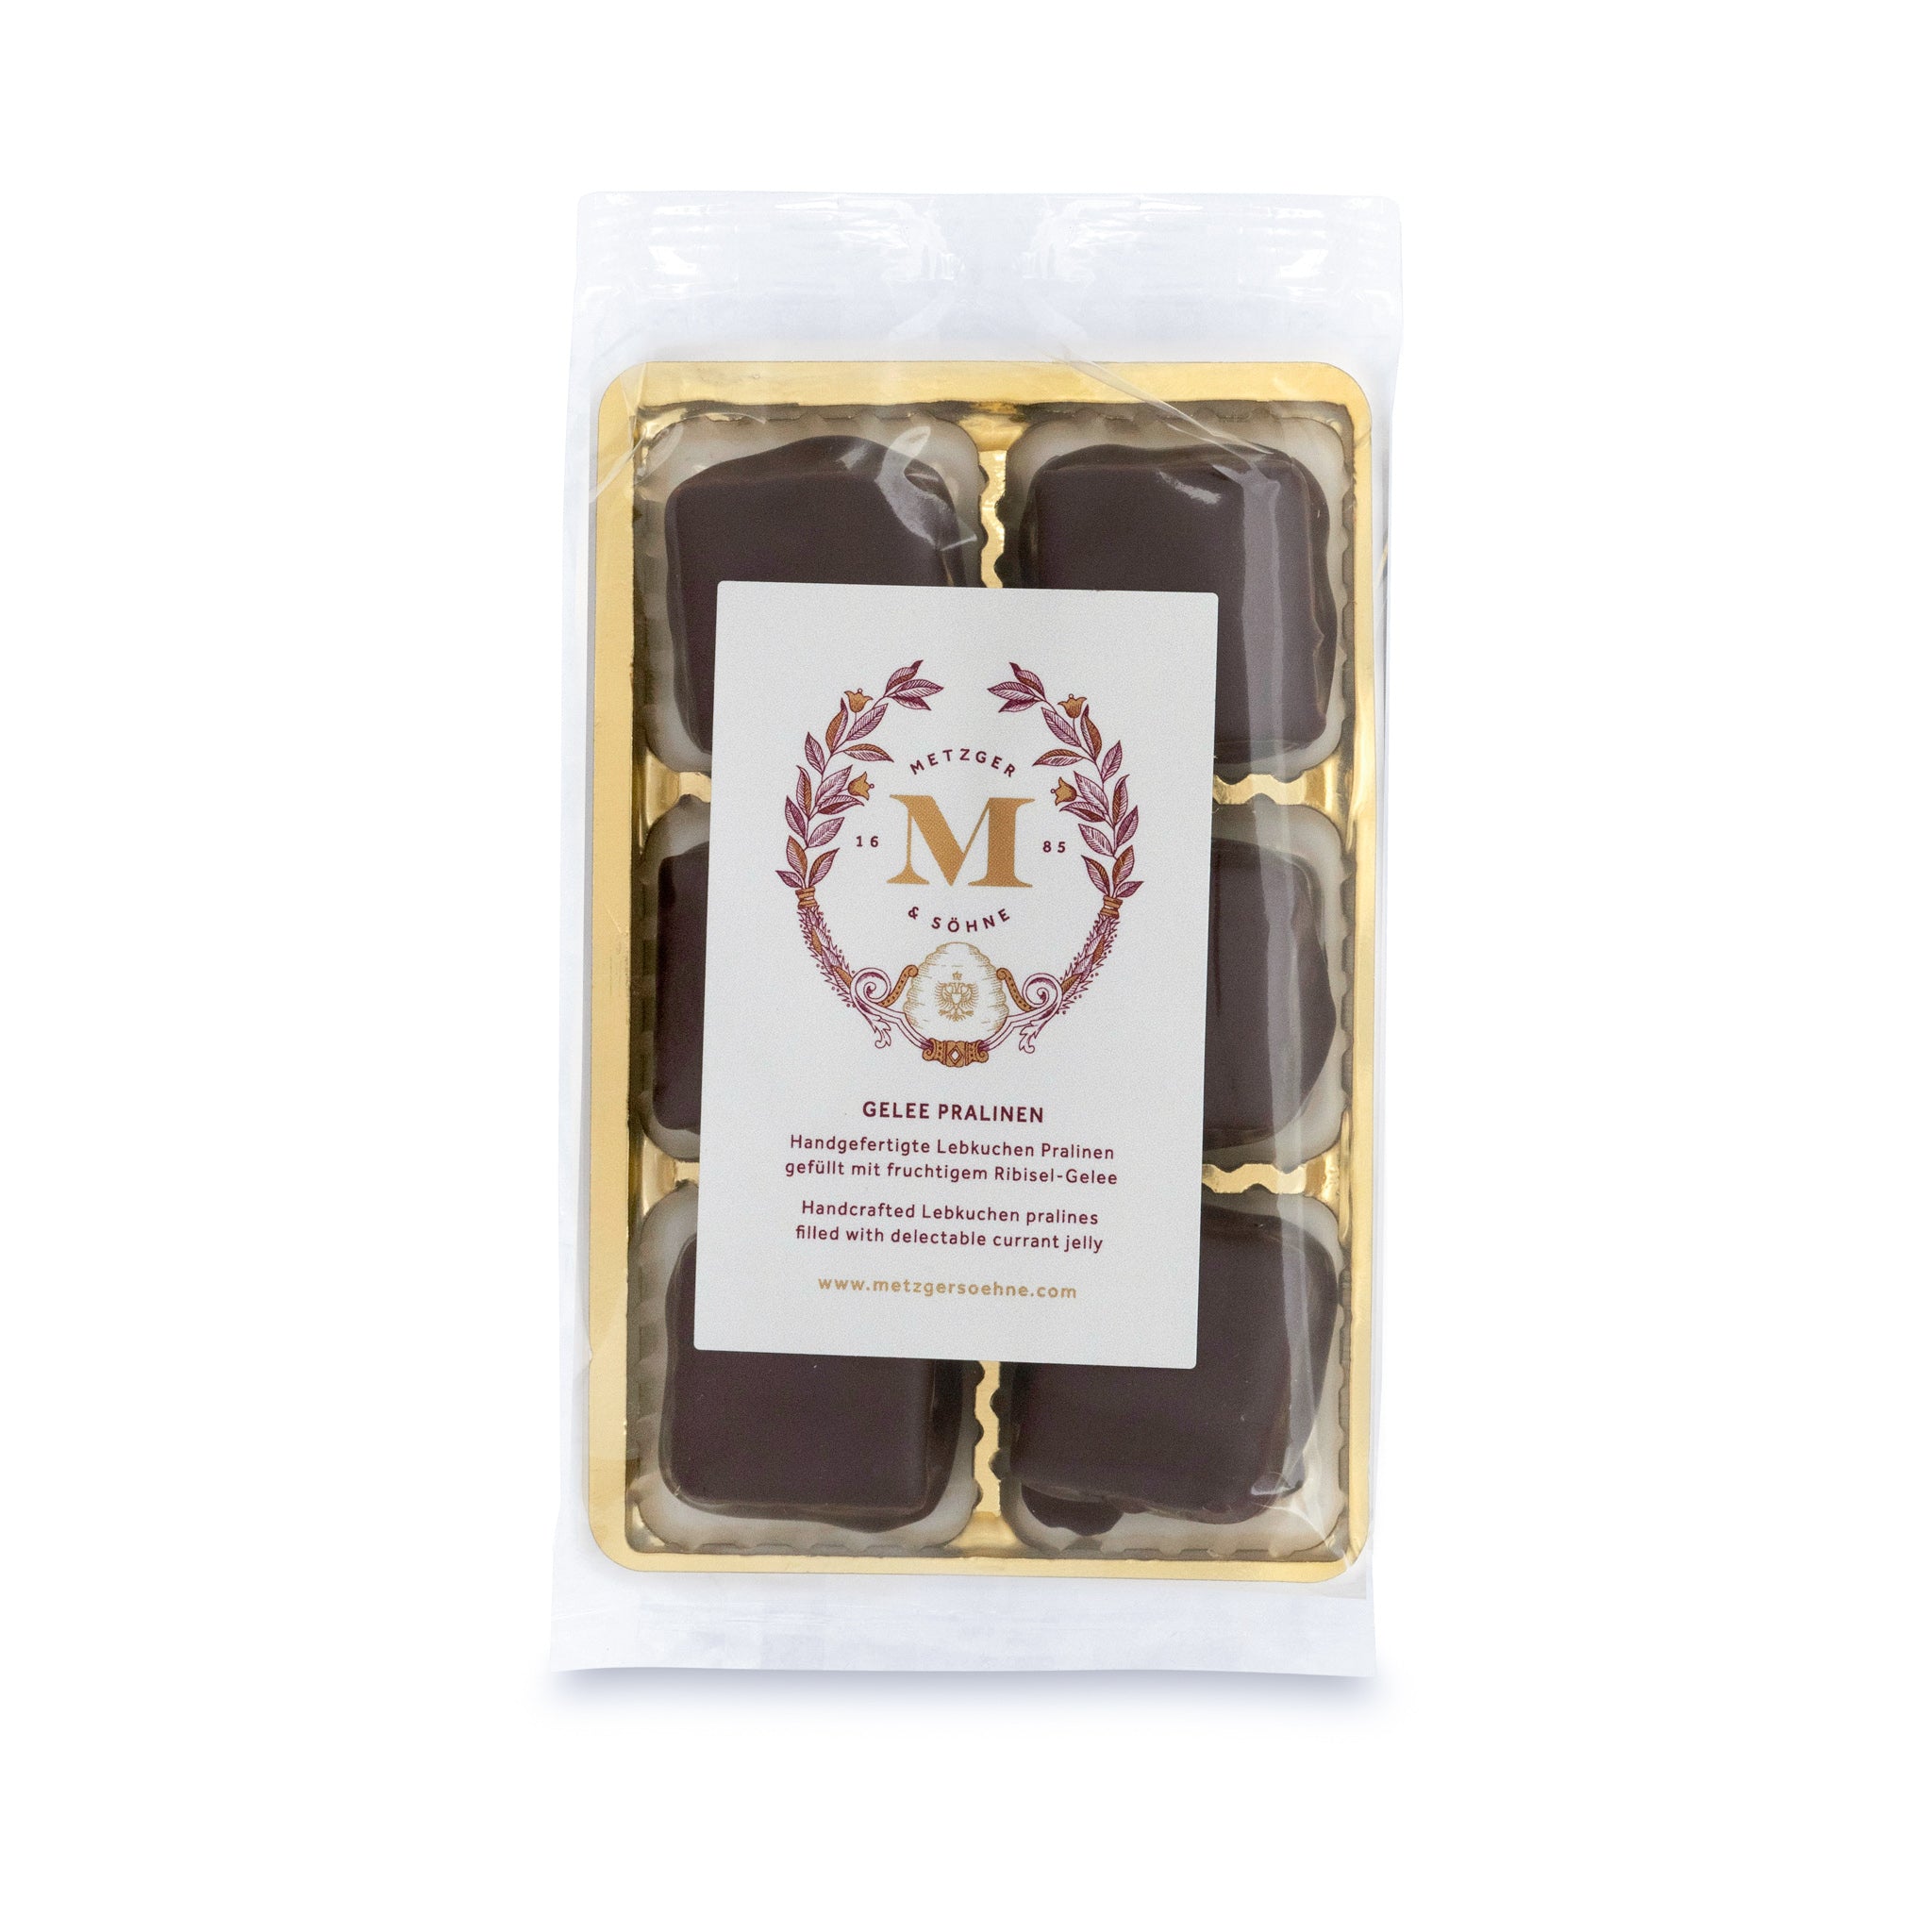 6 handcrafted Lebkuchen 'honey cake' pralines filled with opulent currant jelly, coated in rich, dark chocolate. The high quality chocolate couvertures enchant with an intense chocolate taste, complimenting the Lebkuchen and jelly. A tasty chocolate treat for fruit and chocolate lovers, alike.